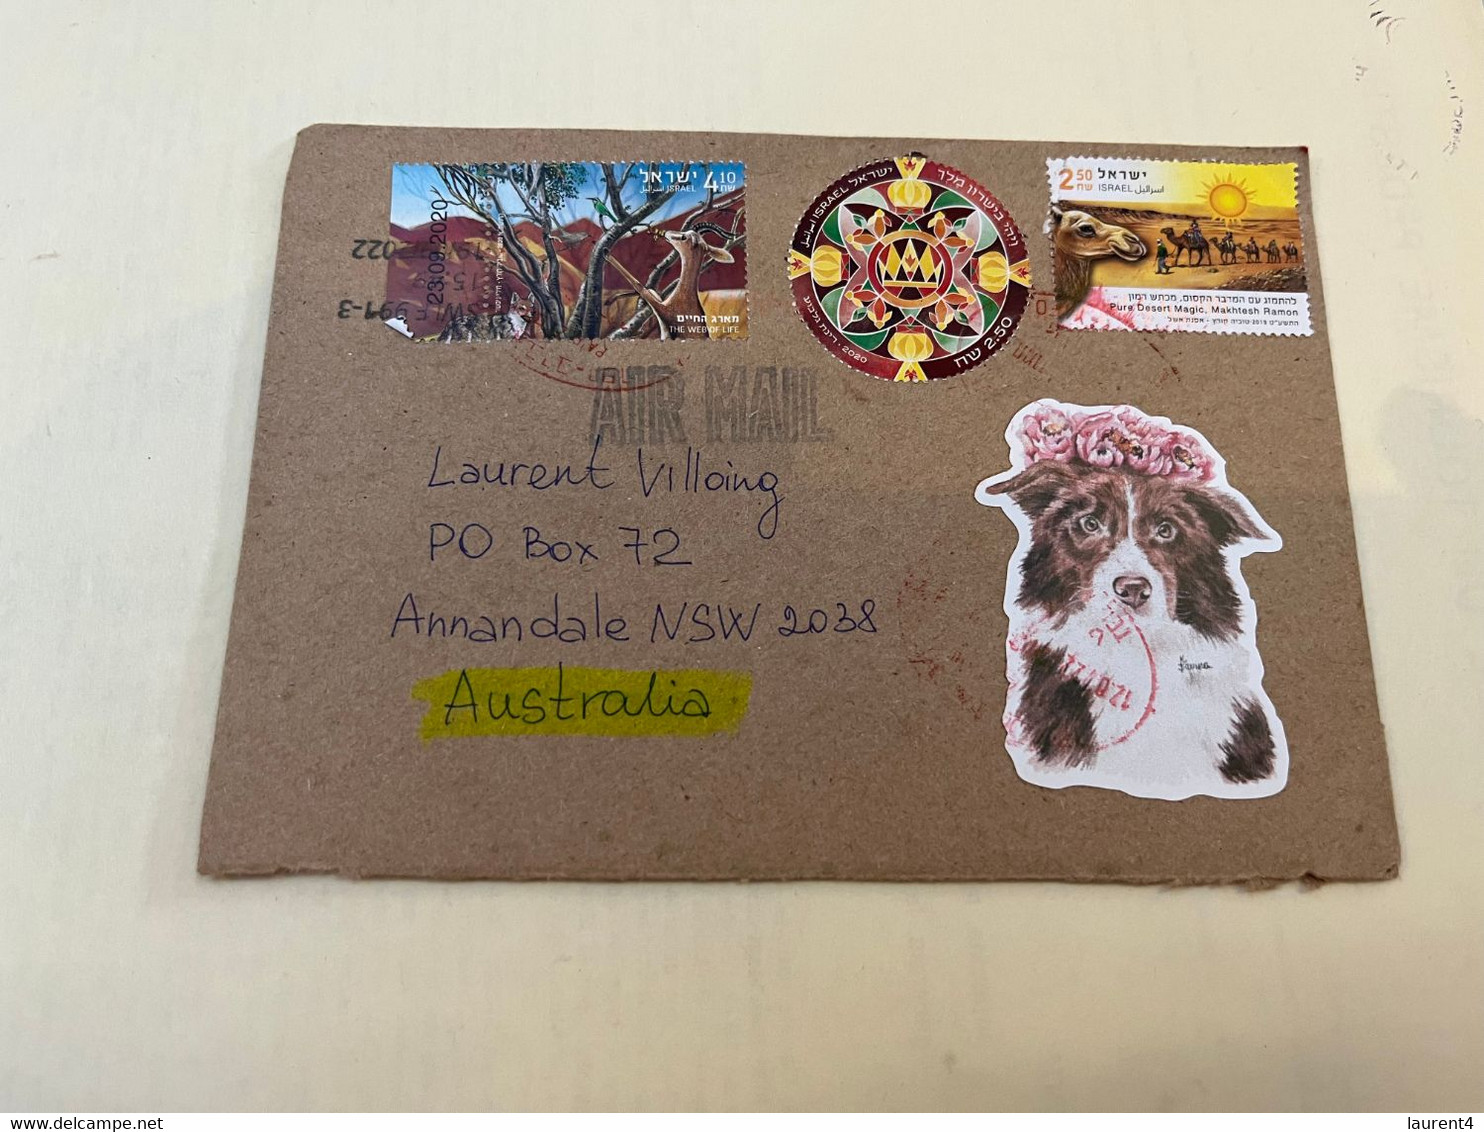 (1 L 7) Letter Posted From Israel To Australia (during COVID-19 Pandemic Crisis) 3 Stamps - Covers & Documents